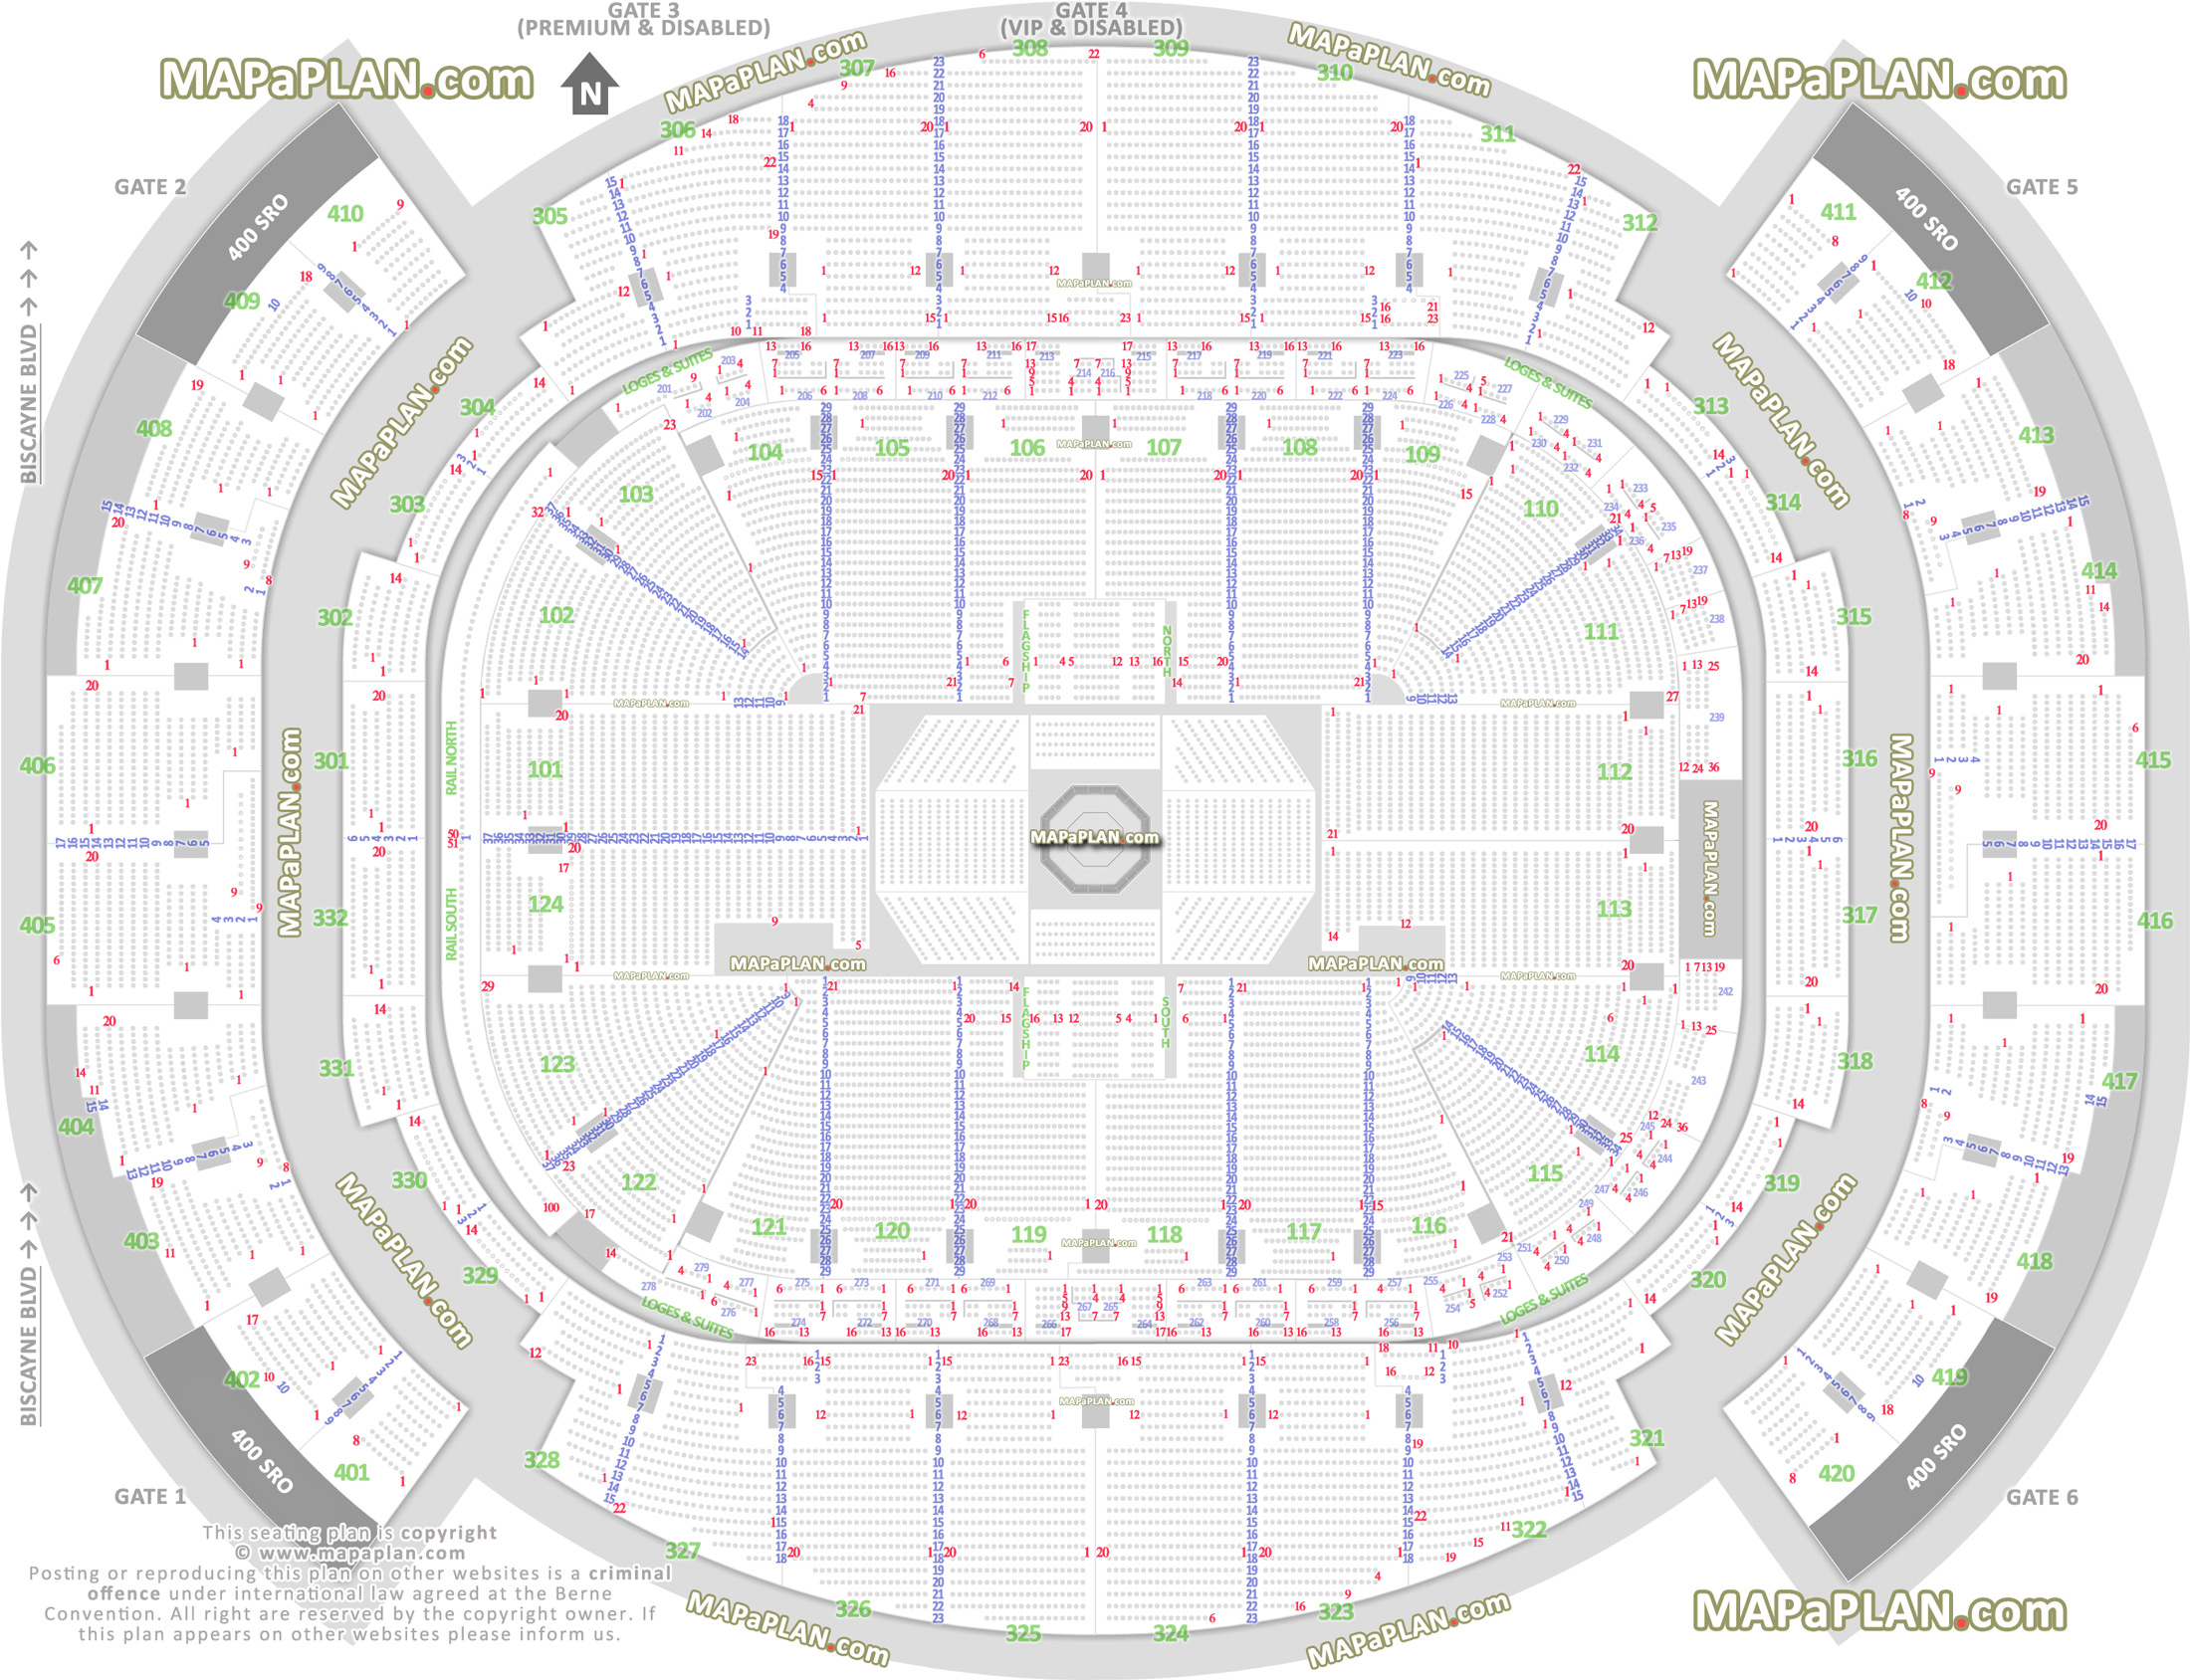 ufc mma fights fully seated setup chart viewer printable information guide balcony bowl rail seats numbering premium luxury executive vip suites Miami Kaseya Center Arena seating chart